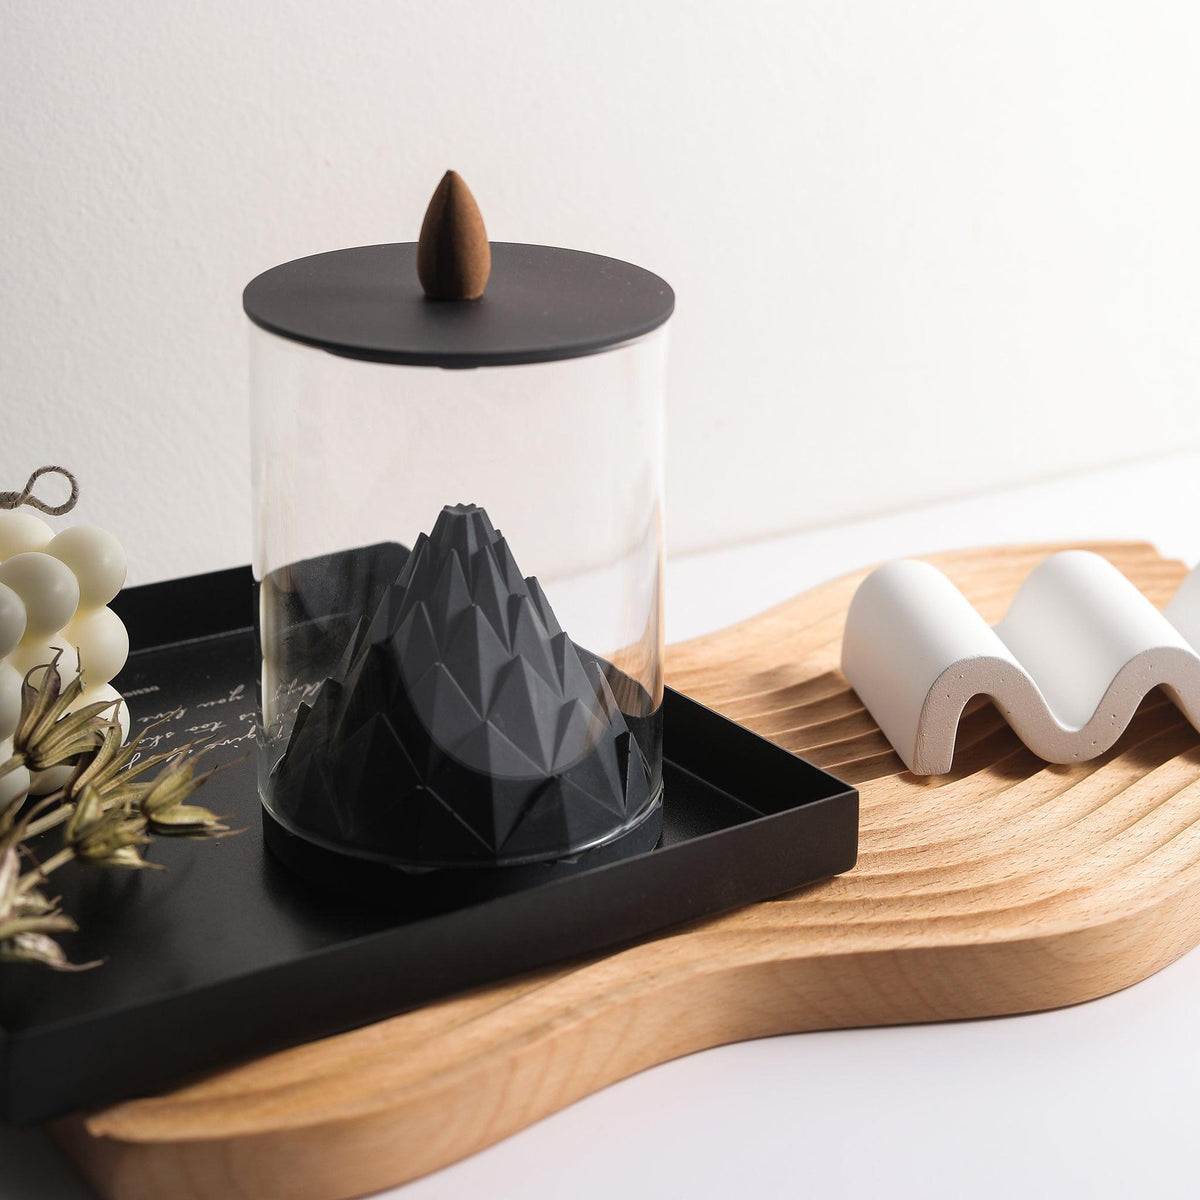 Nelumbo Terrarium Incense Fountain by Kin Objects on a wooden tray